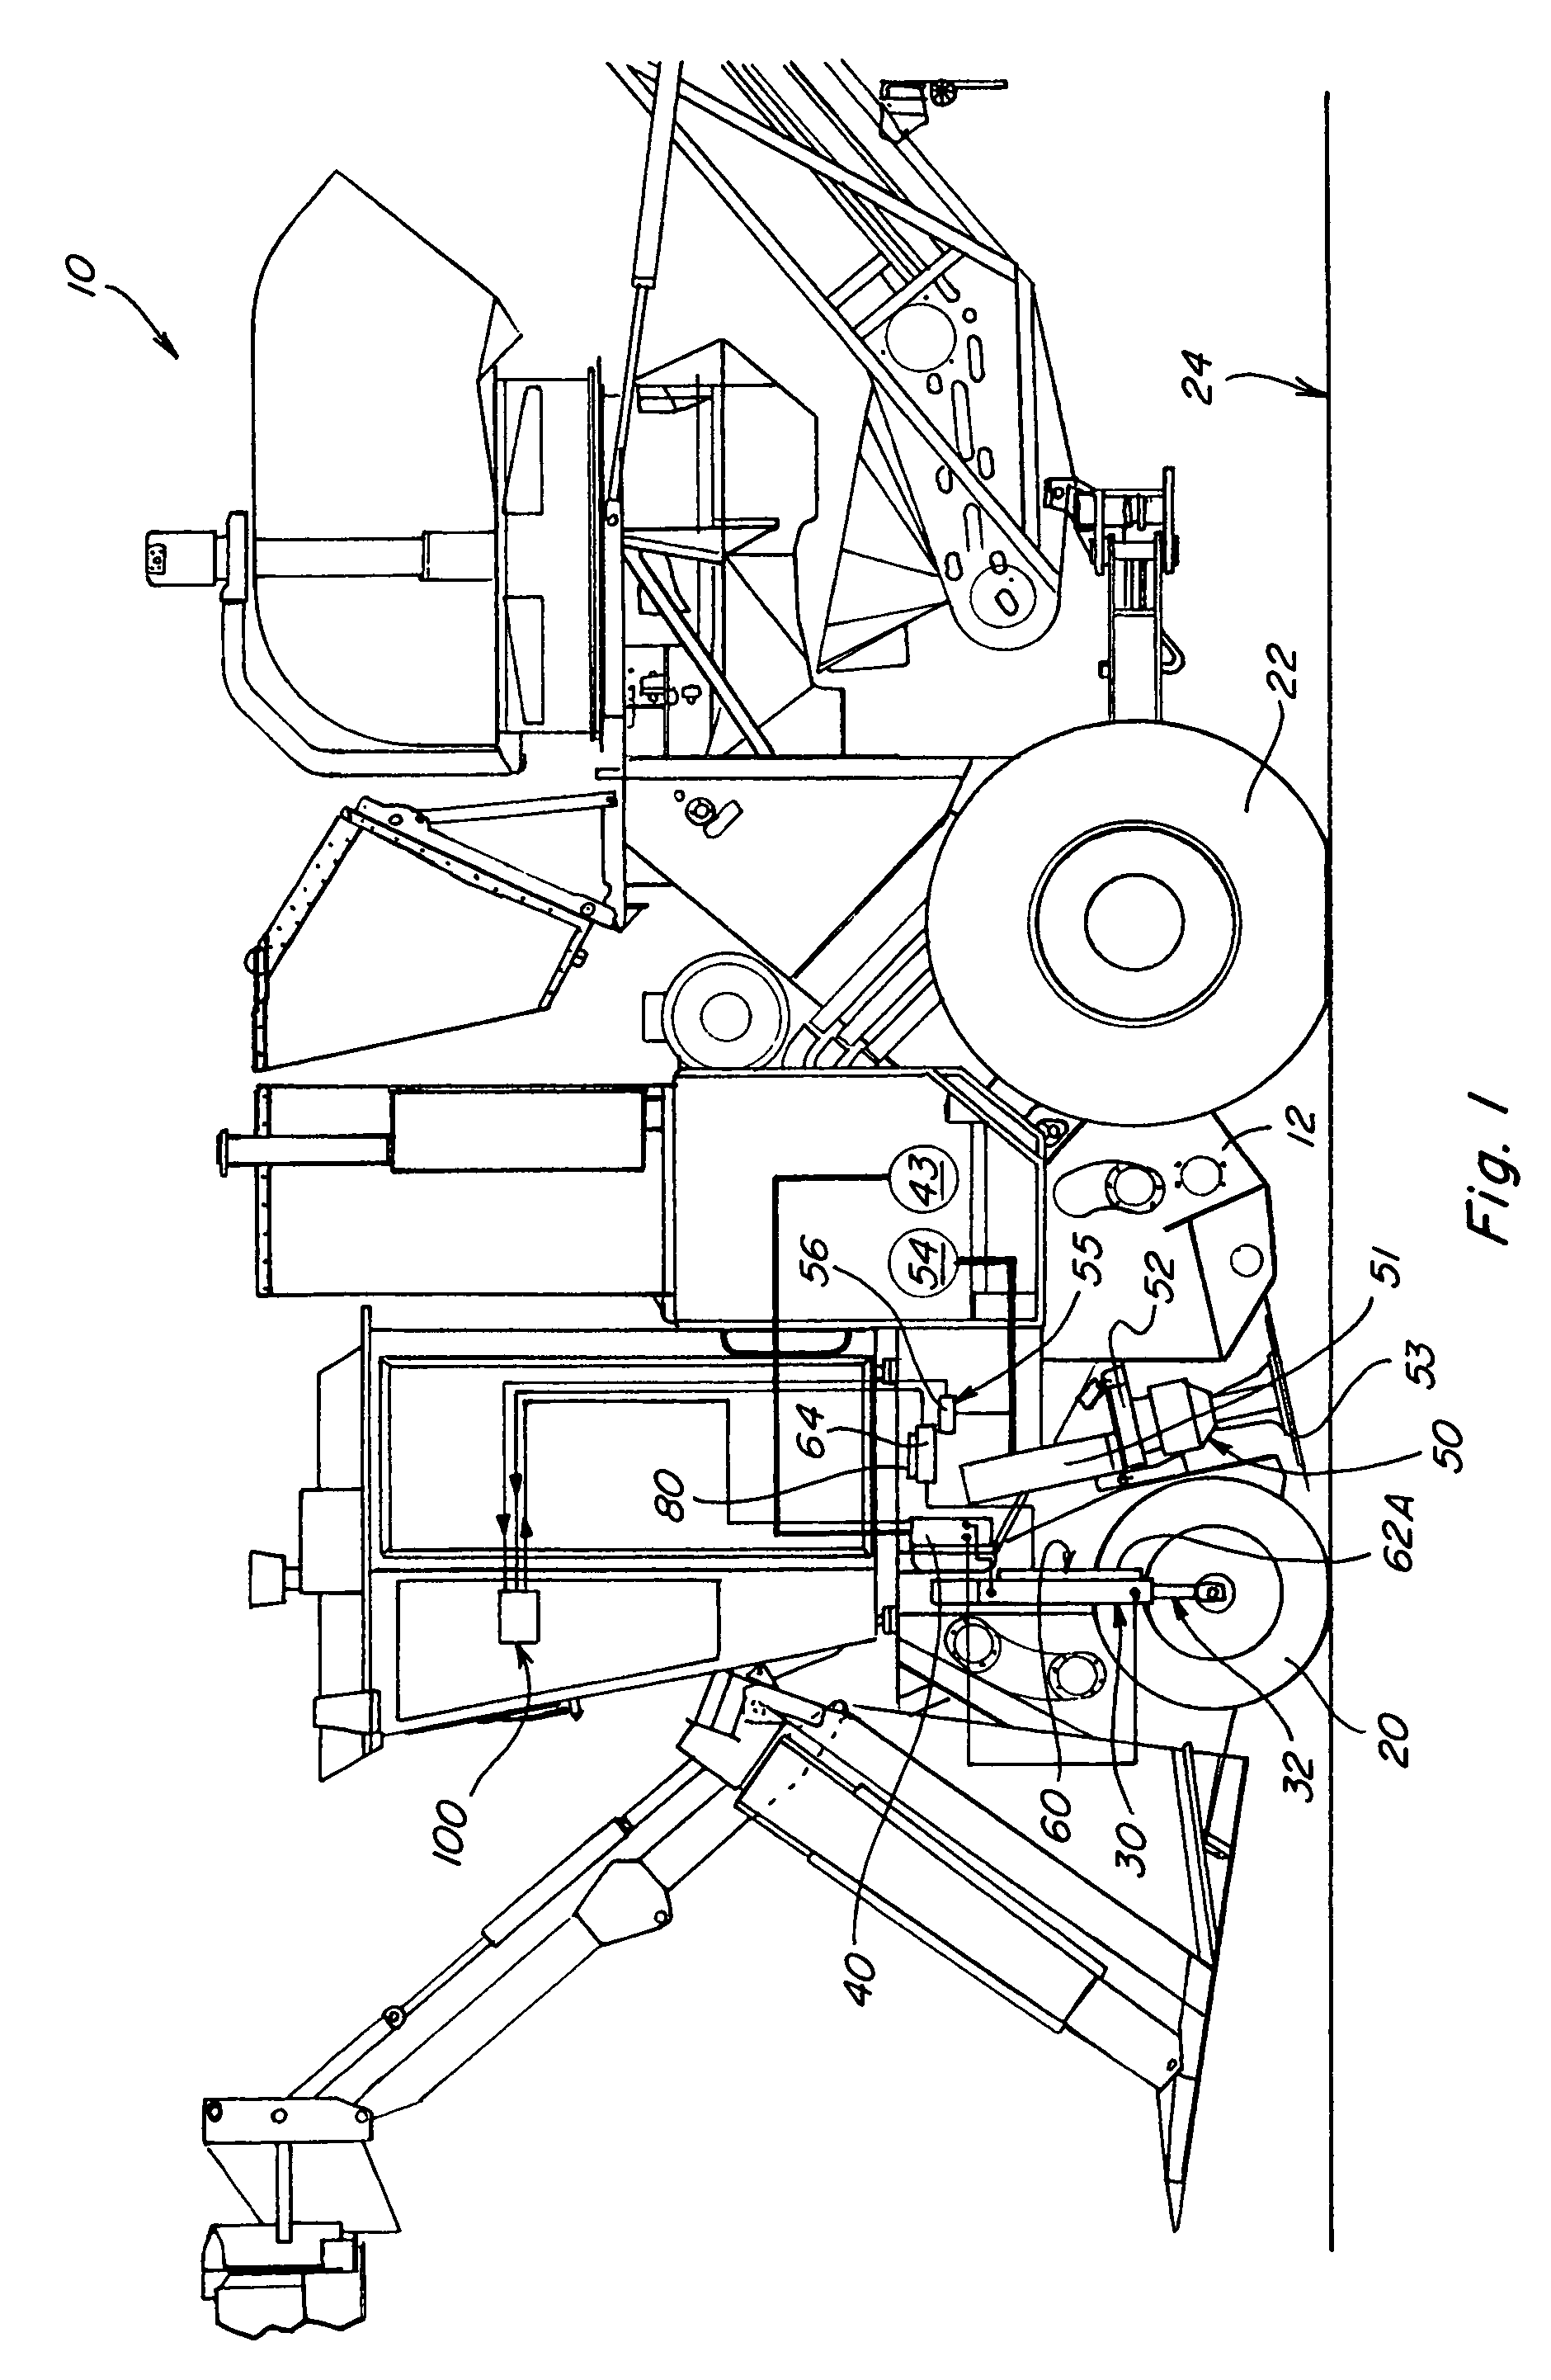 System and method for controlling the base cutter height of a sugar cane harvester